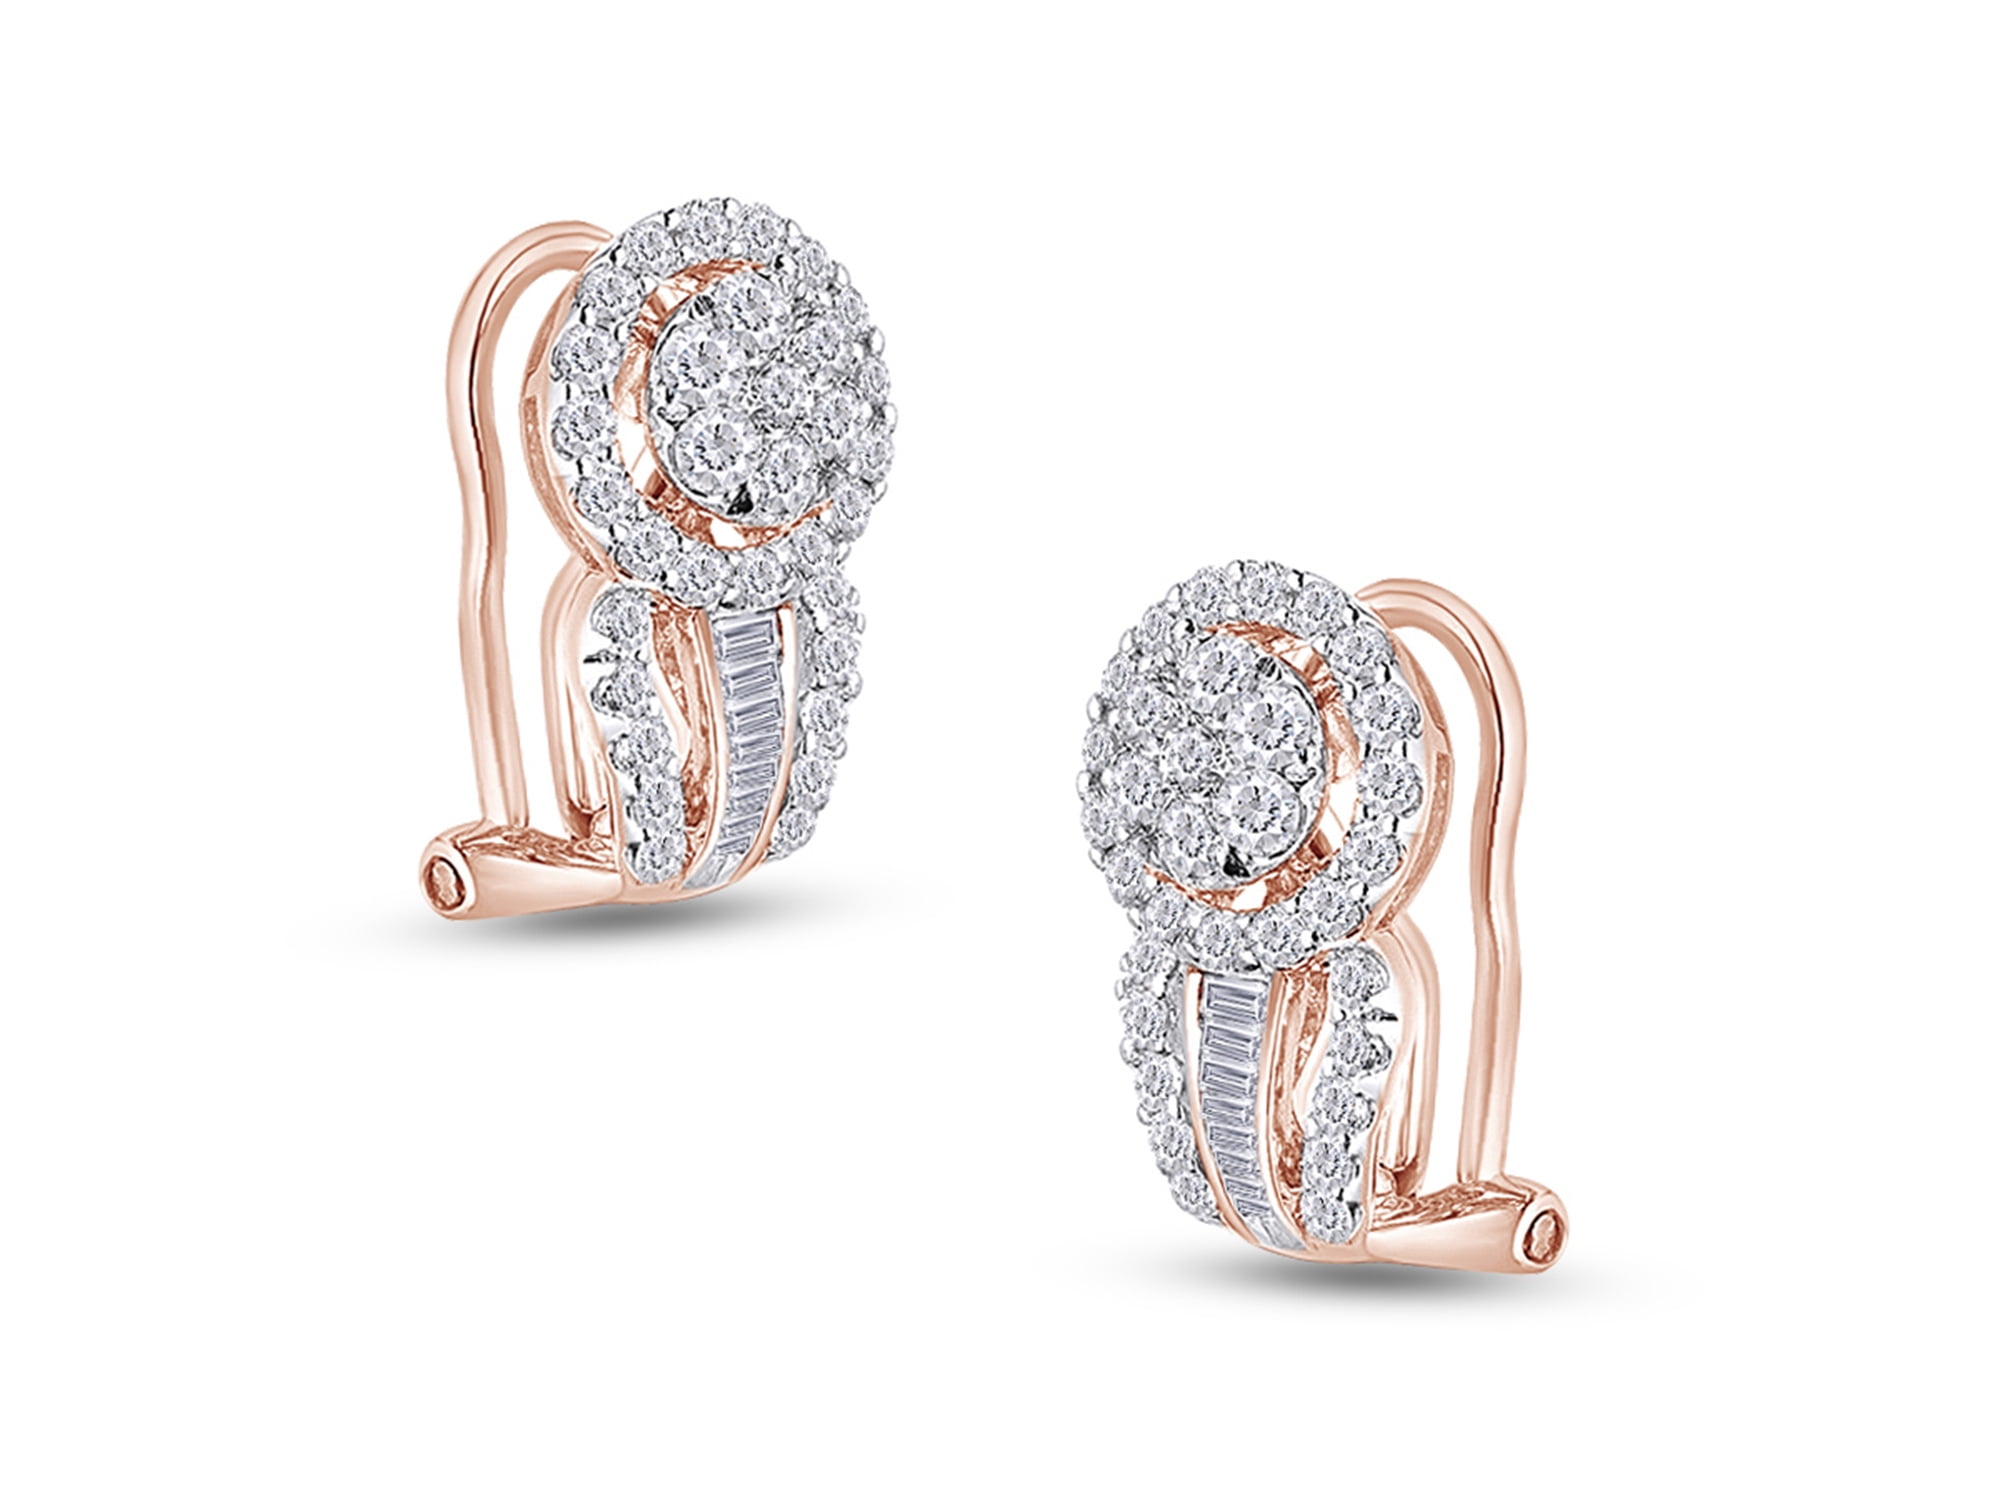 Details about   Baguette Diamond Stud Earrings Gold Wedding Earrings Anniversary Gift For Her